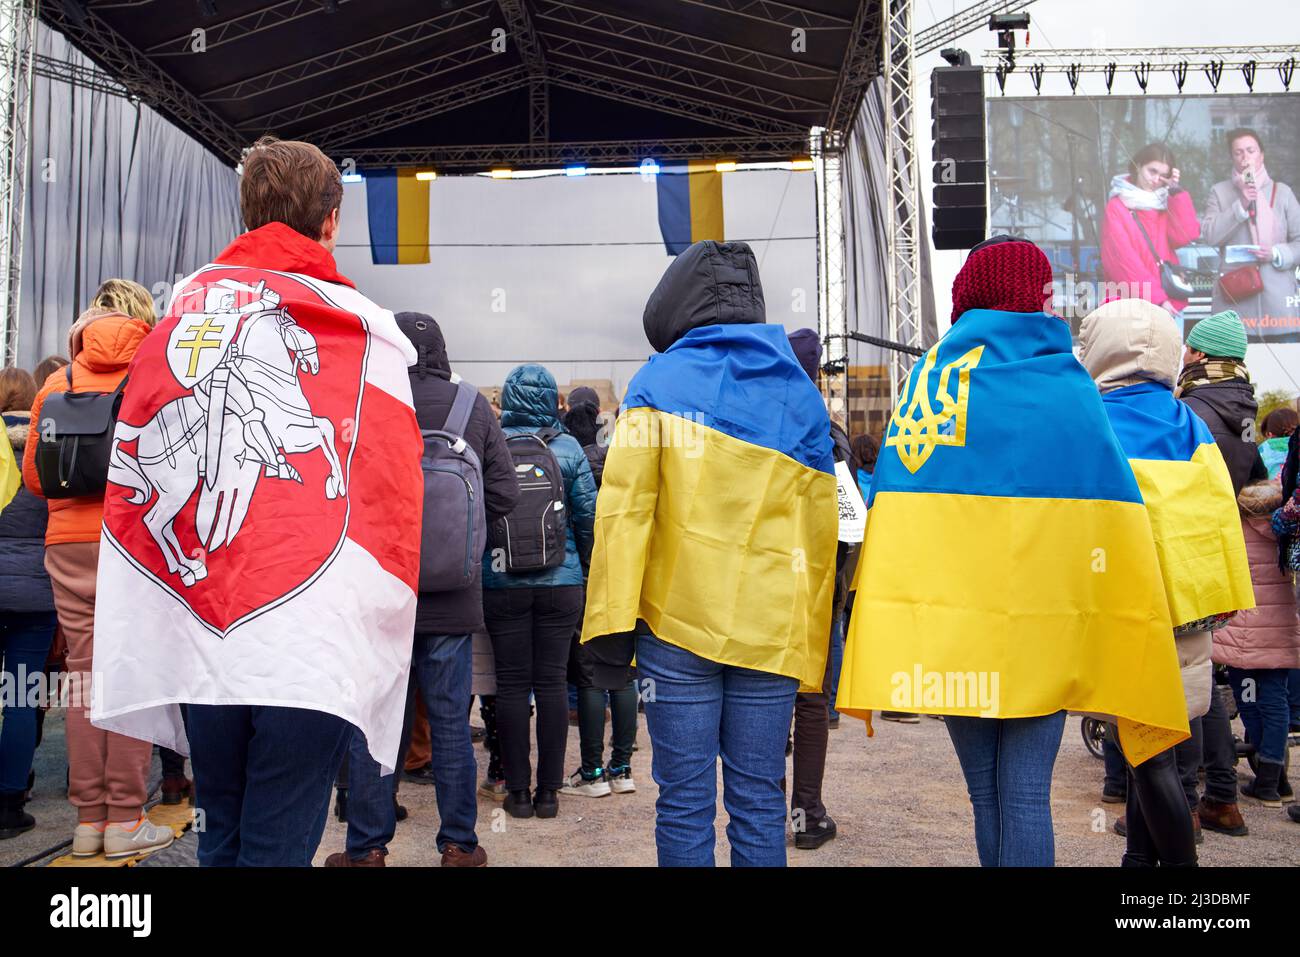 PRAGUE, CZECH REPUBLIC - APRIL 3, 2022: People dressed in Ukrainian and Belarusian opposition flags at the Letna beneficial concert in support against Stock Photo